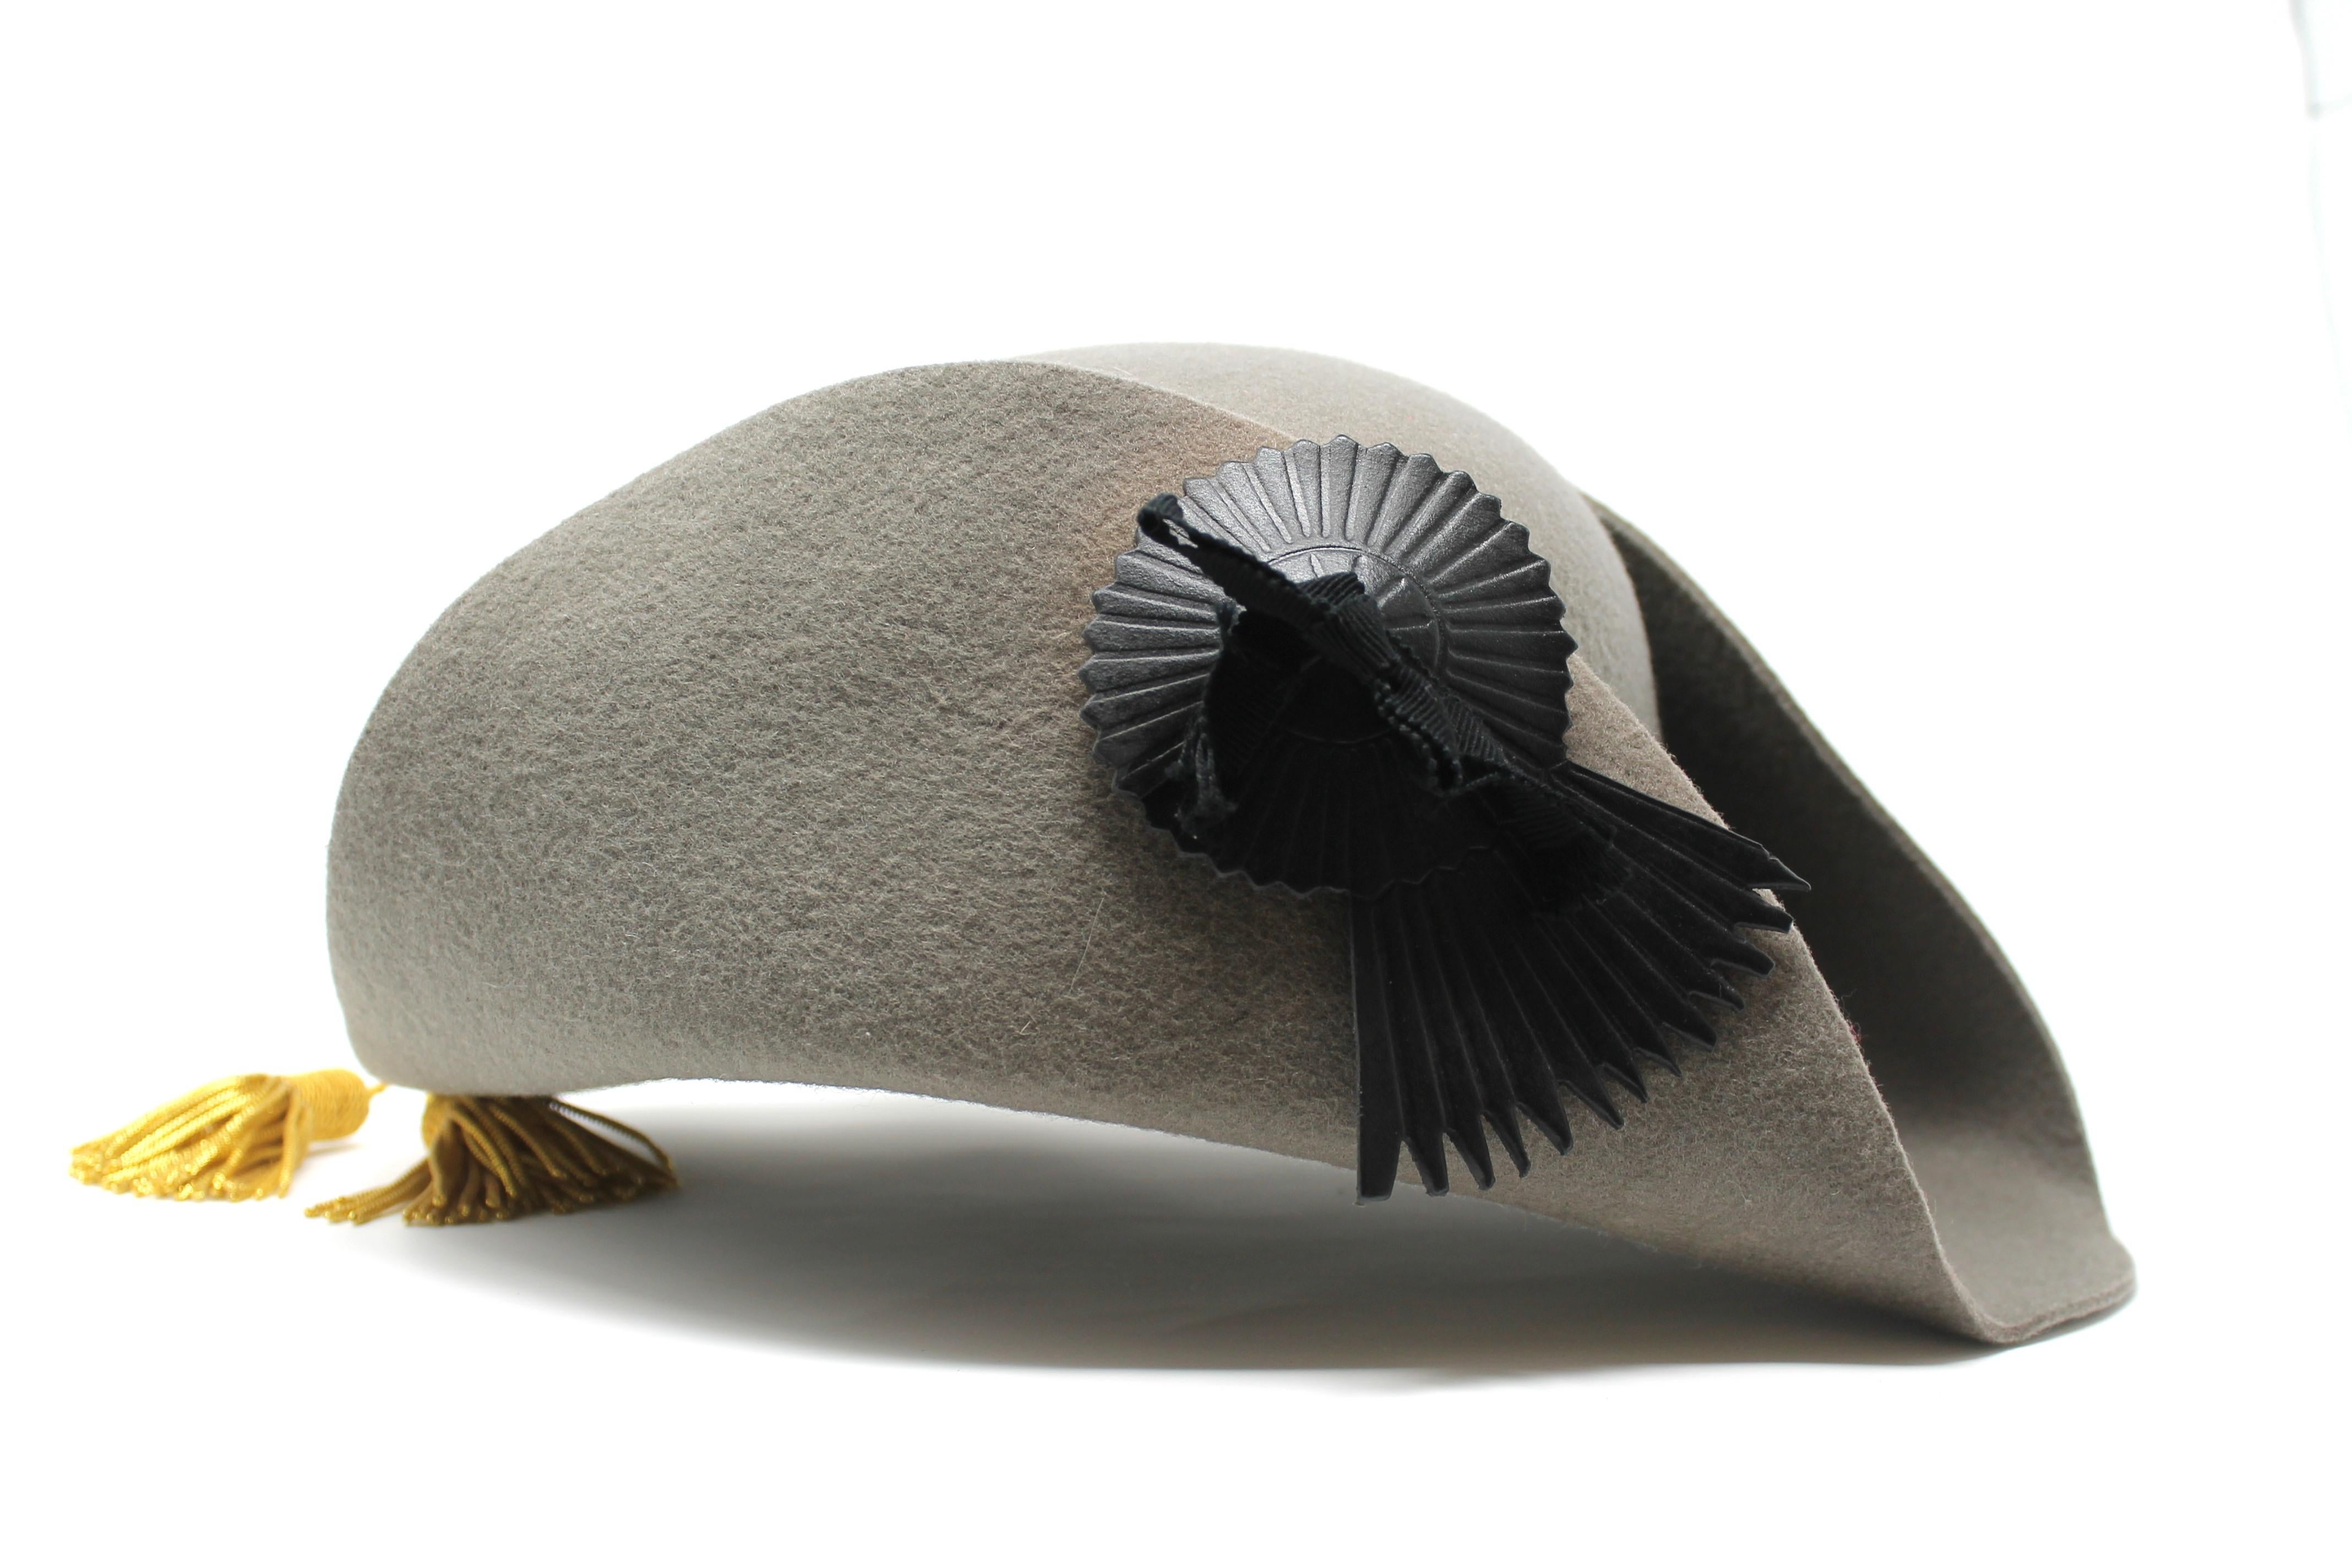  -Iconic hat from Vivienne Westwood, first seen on the 